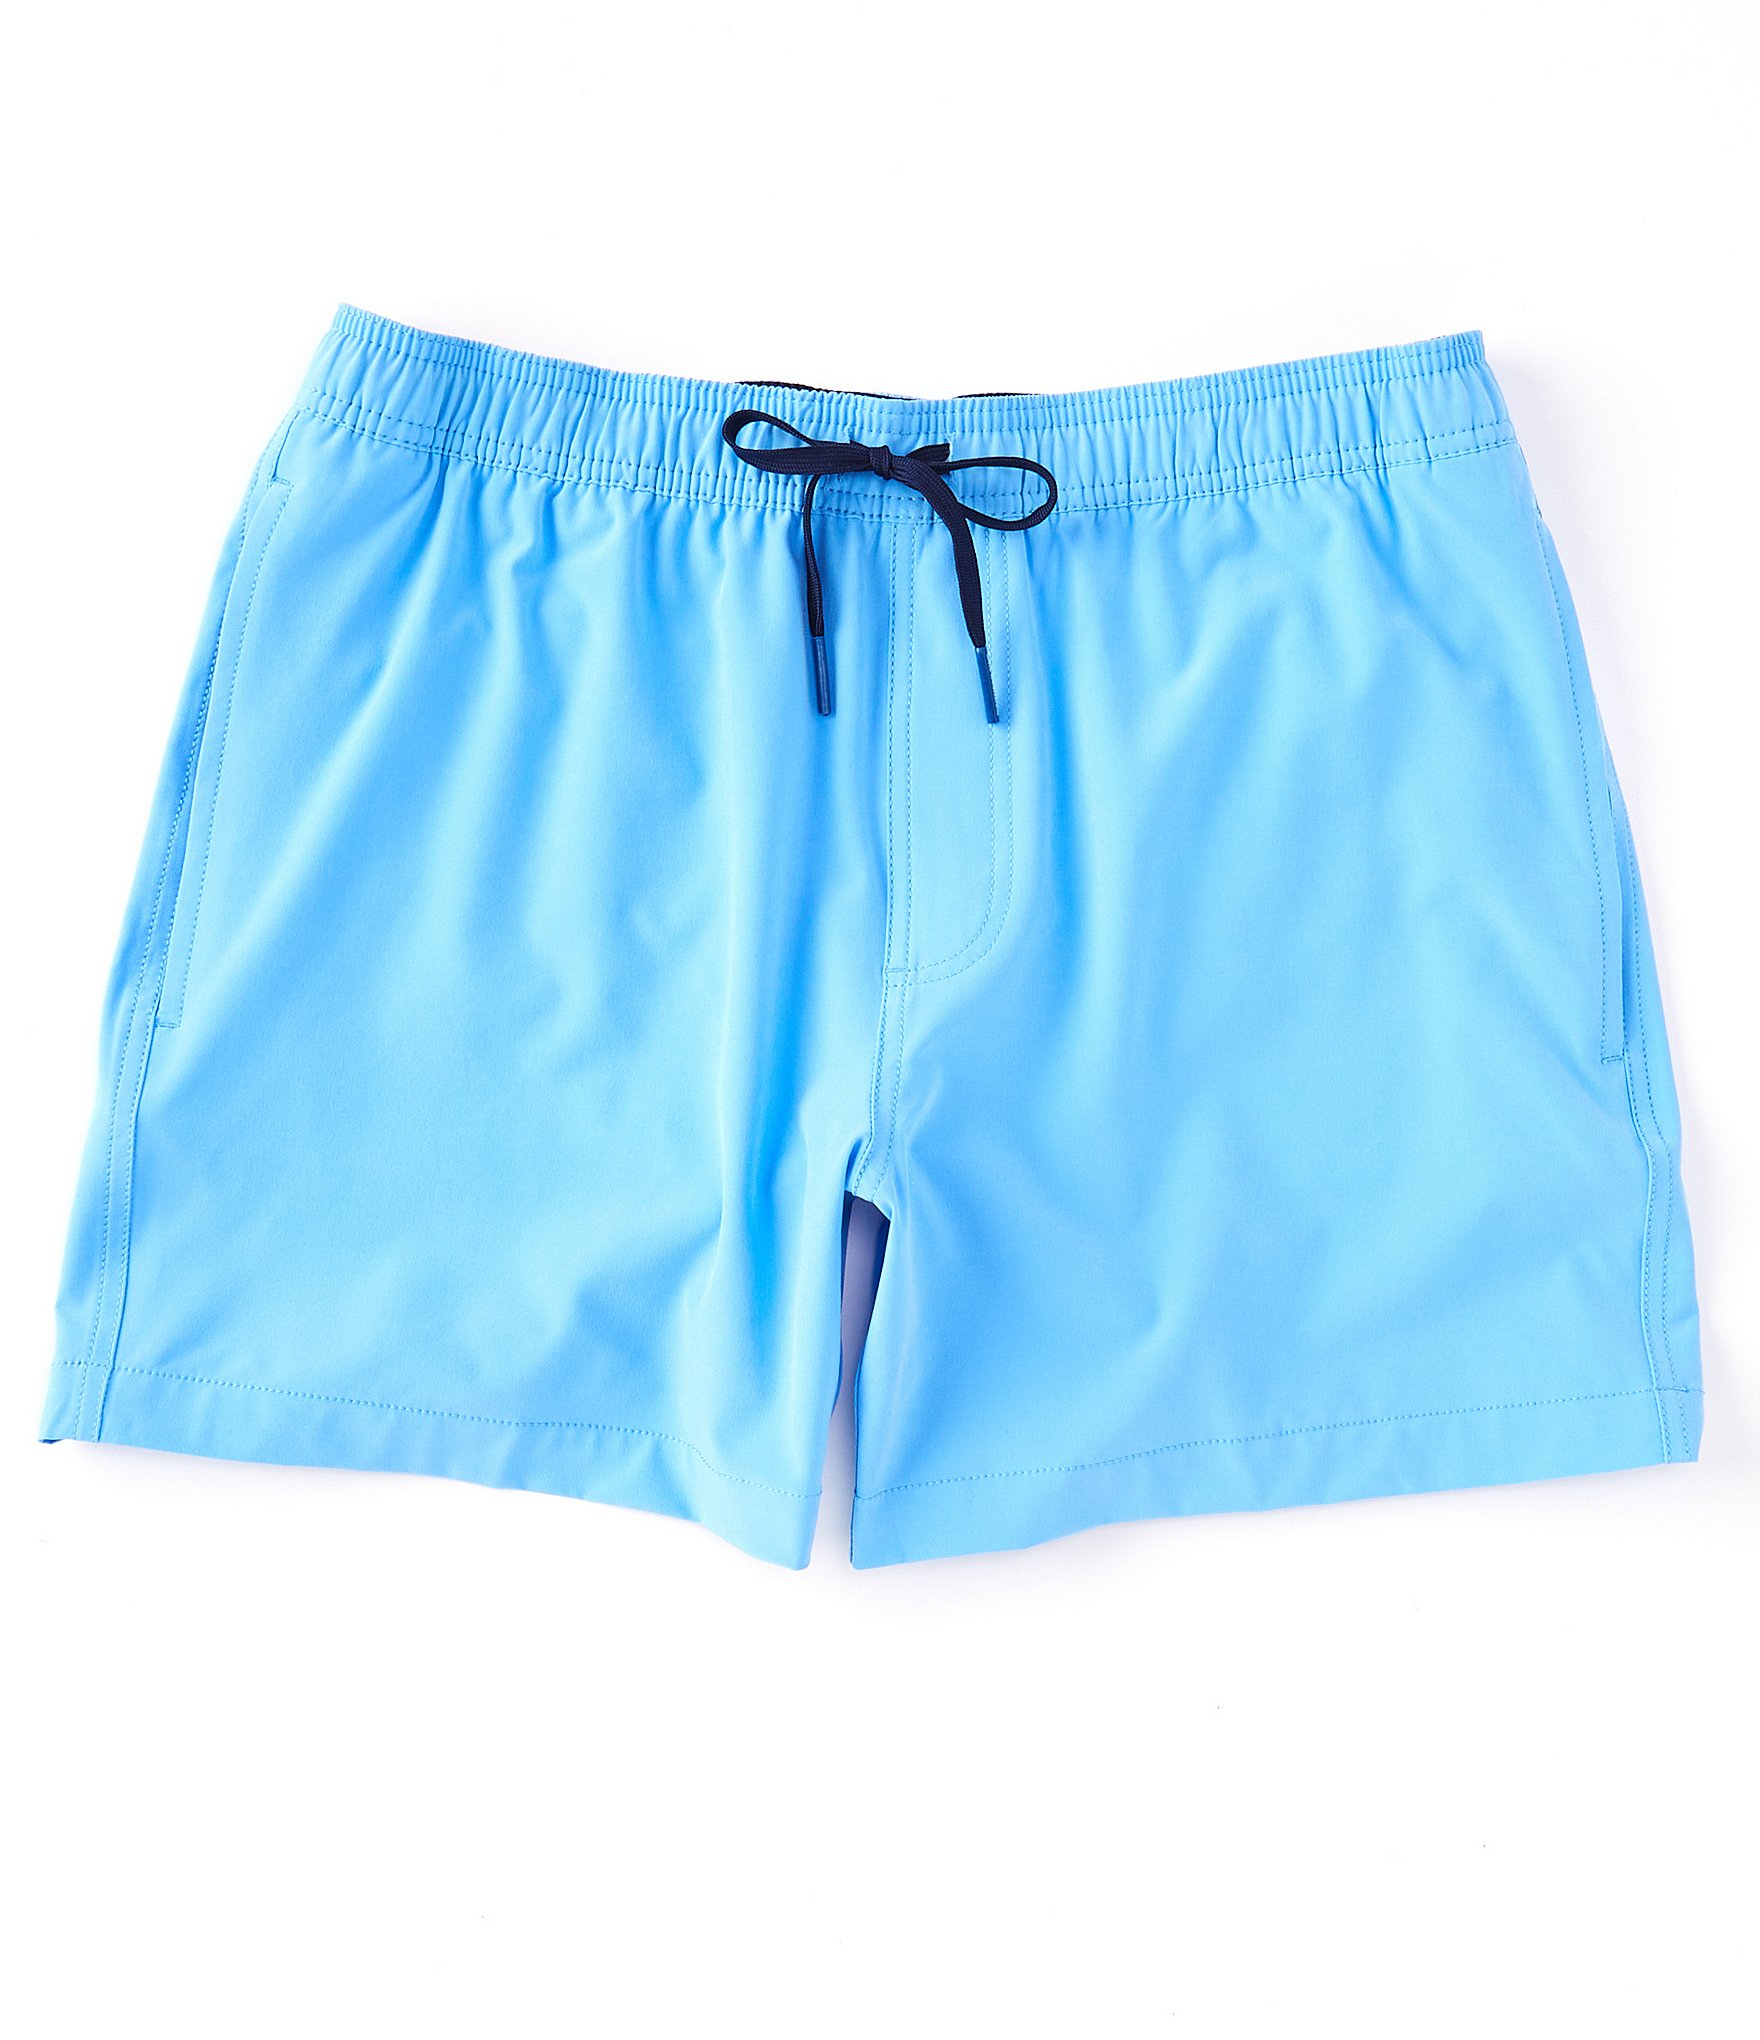 Southern Tide Solid Tonal 2.0 6